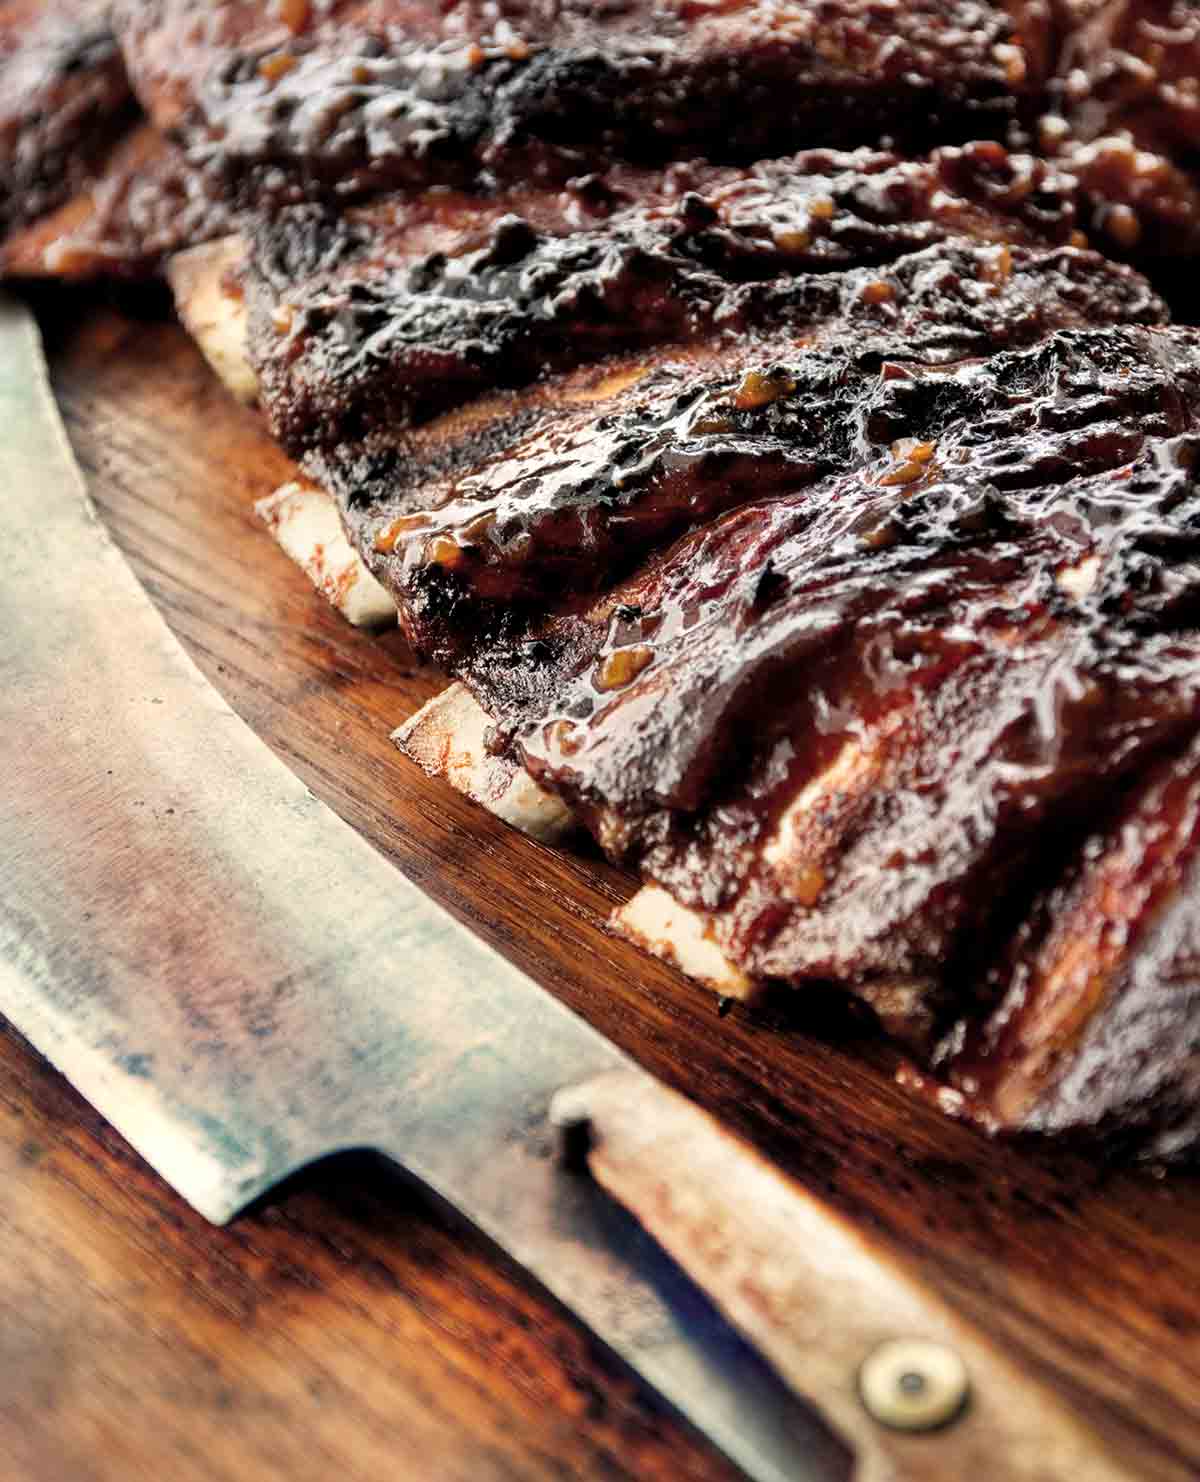 A knife lying next to a slab of barbecue beef ribs.